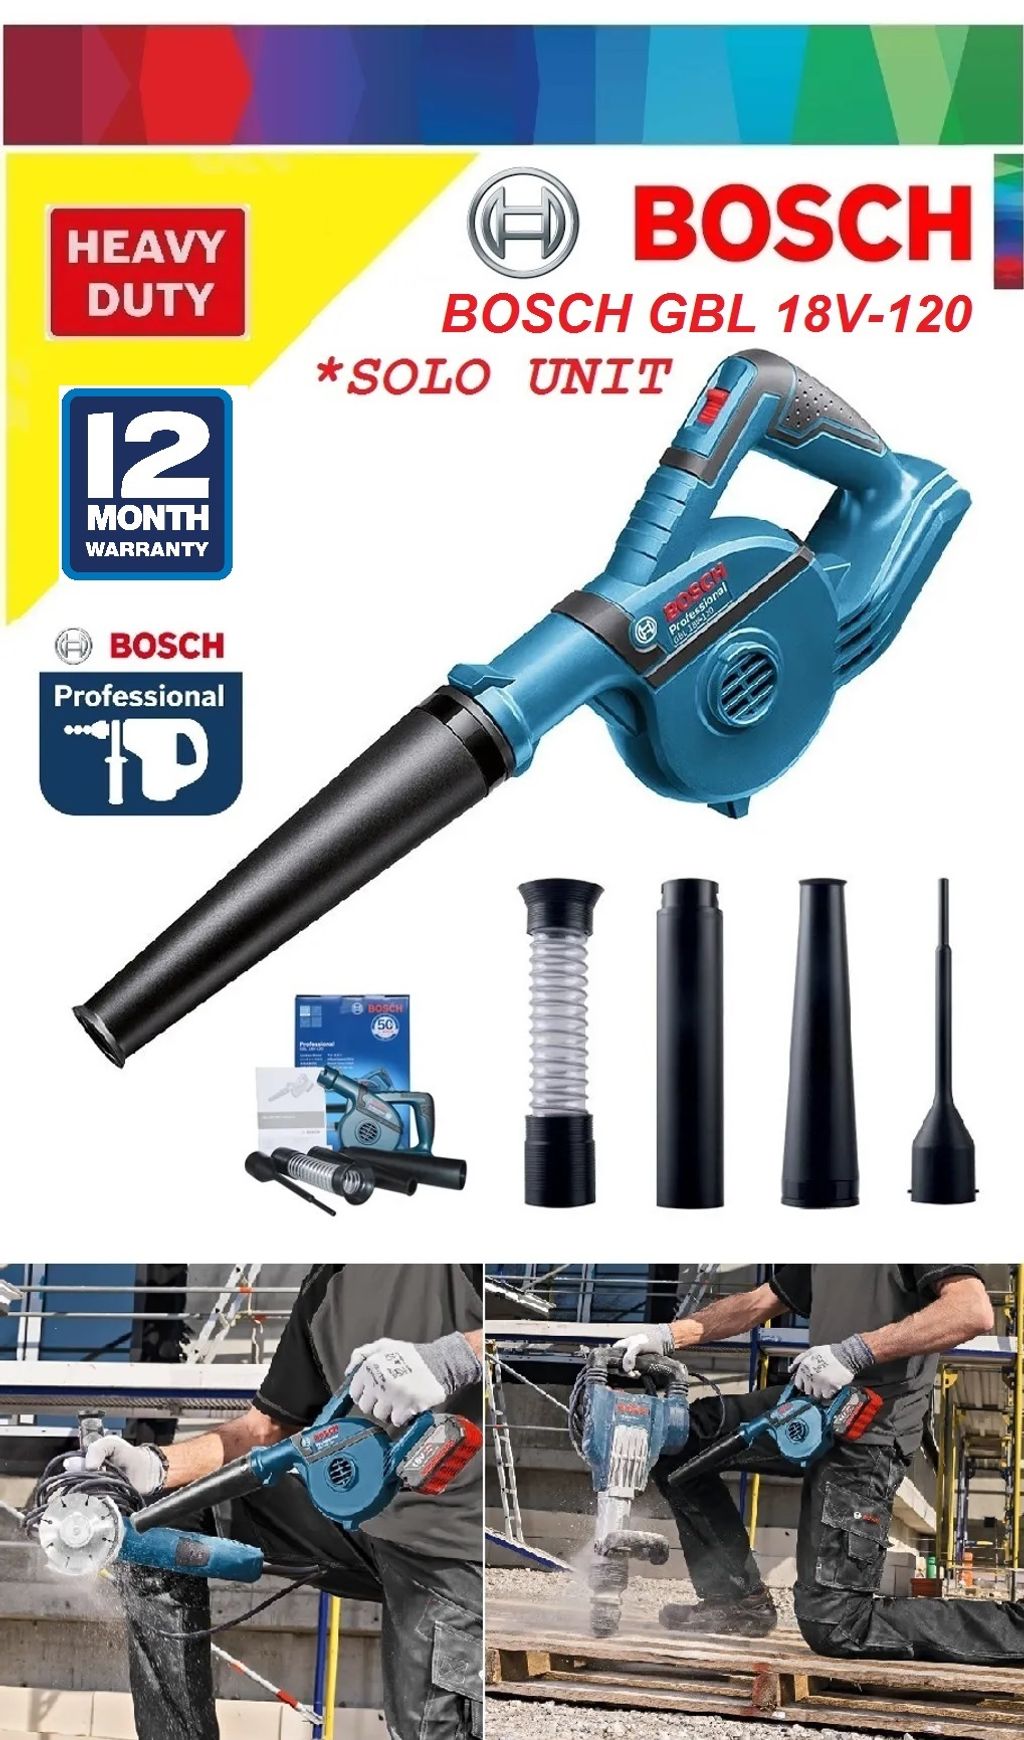 Bosch GBL 18V Professional Cordless Blower (Solo) – MY Power Tools